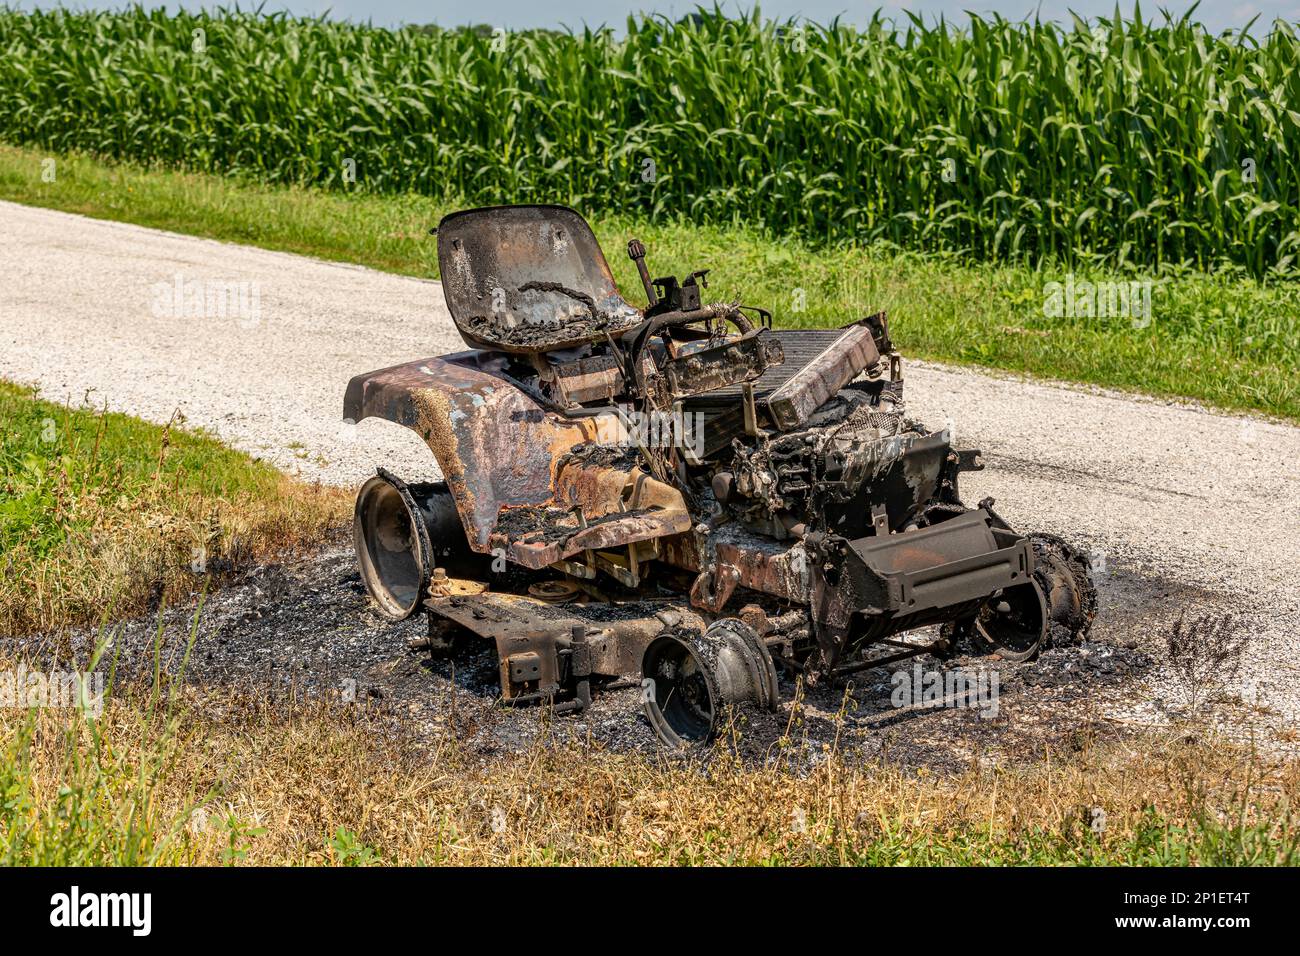 Lawn mower tractor damaged from fire. Lawn equipment maintenance, repair and homeowners insurance concept. Stock Photo